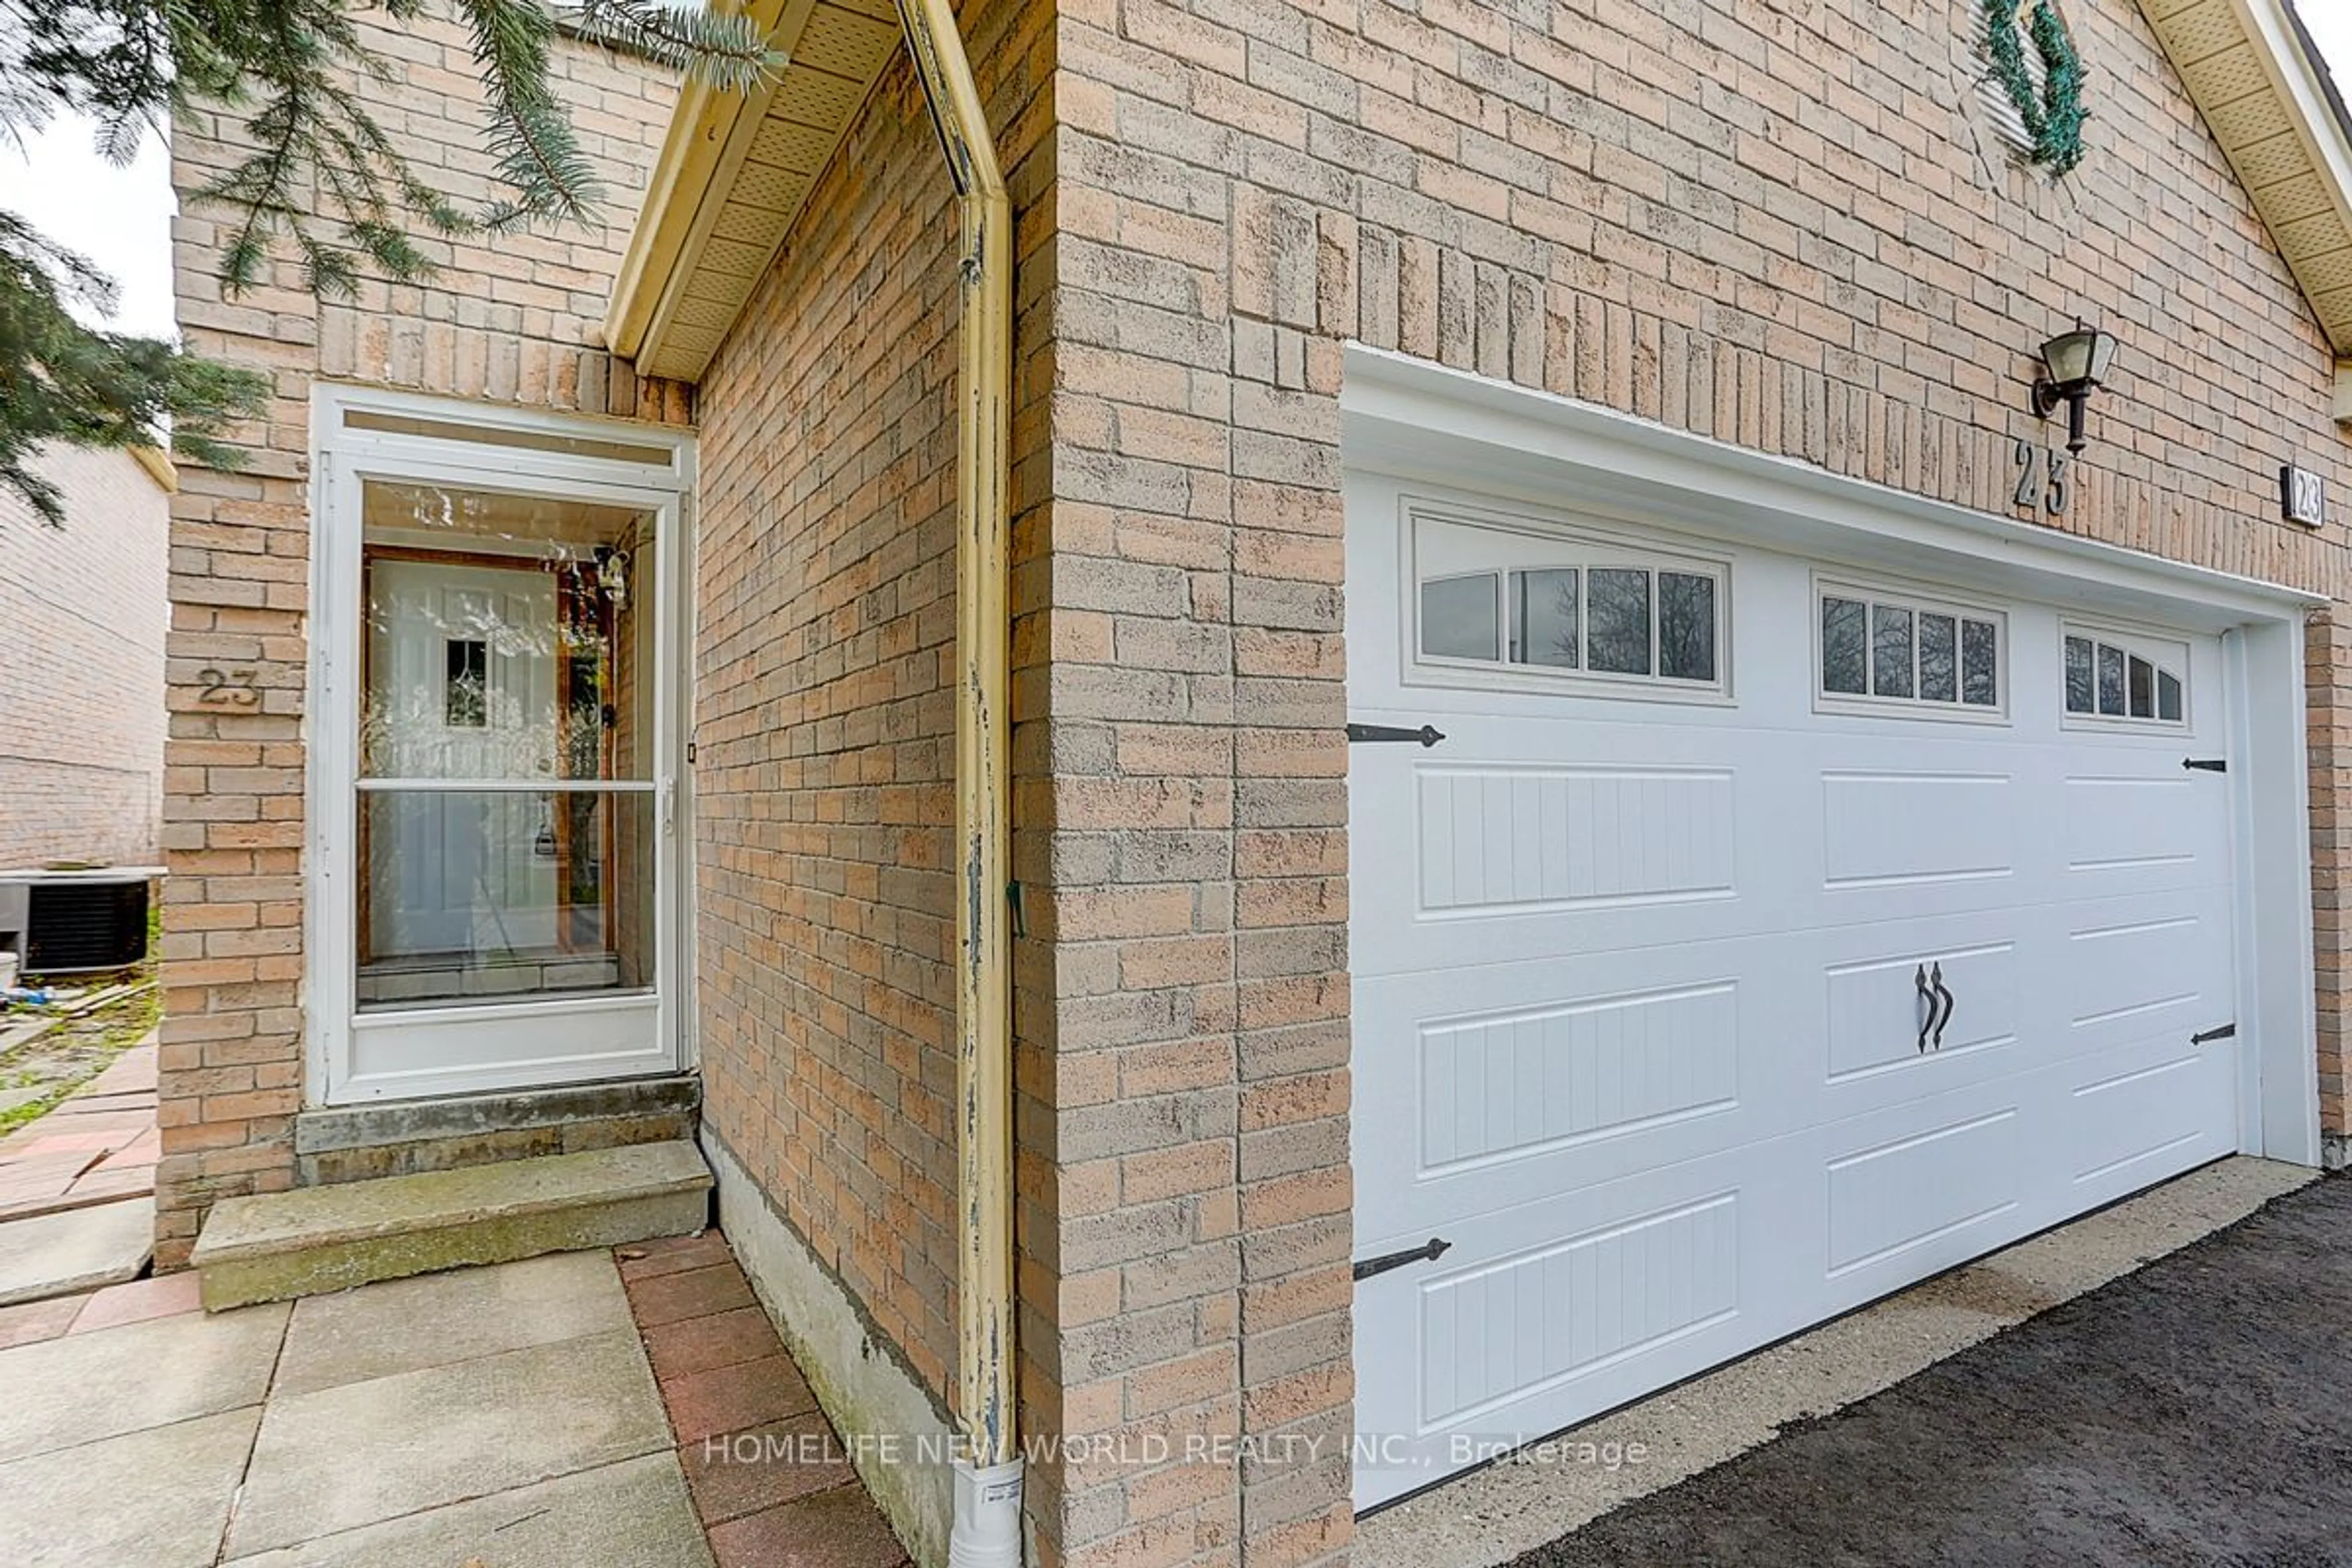 Home with brick exterior material for 23 Martlesham Rd, Markham Ontario L3R 7K5